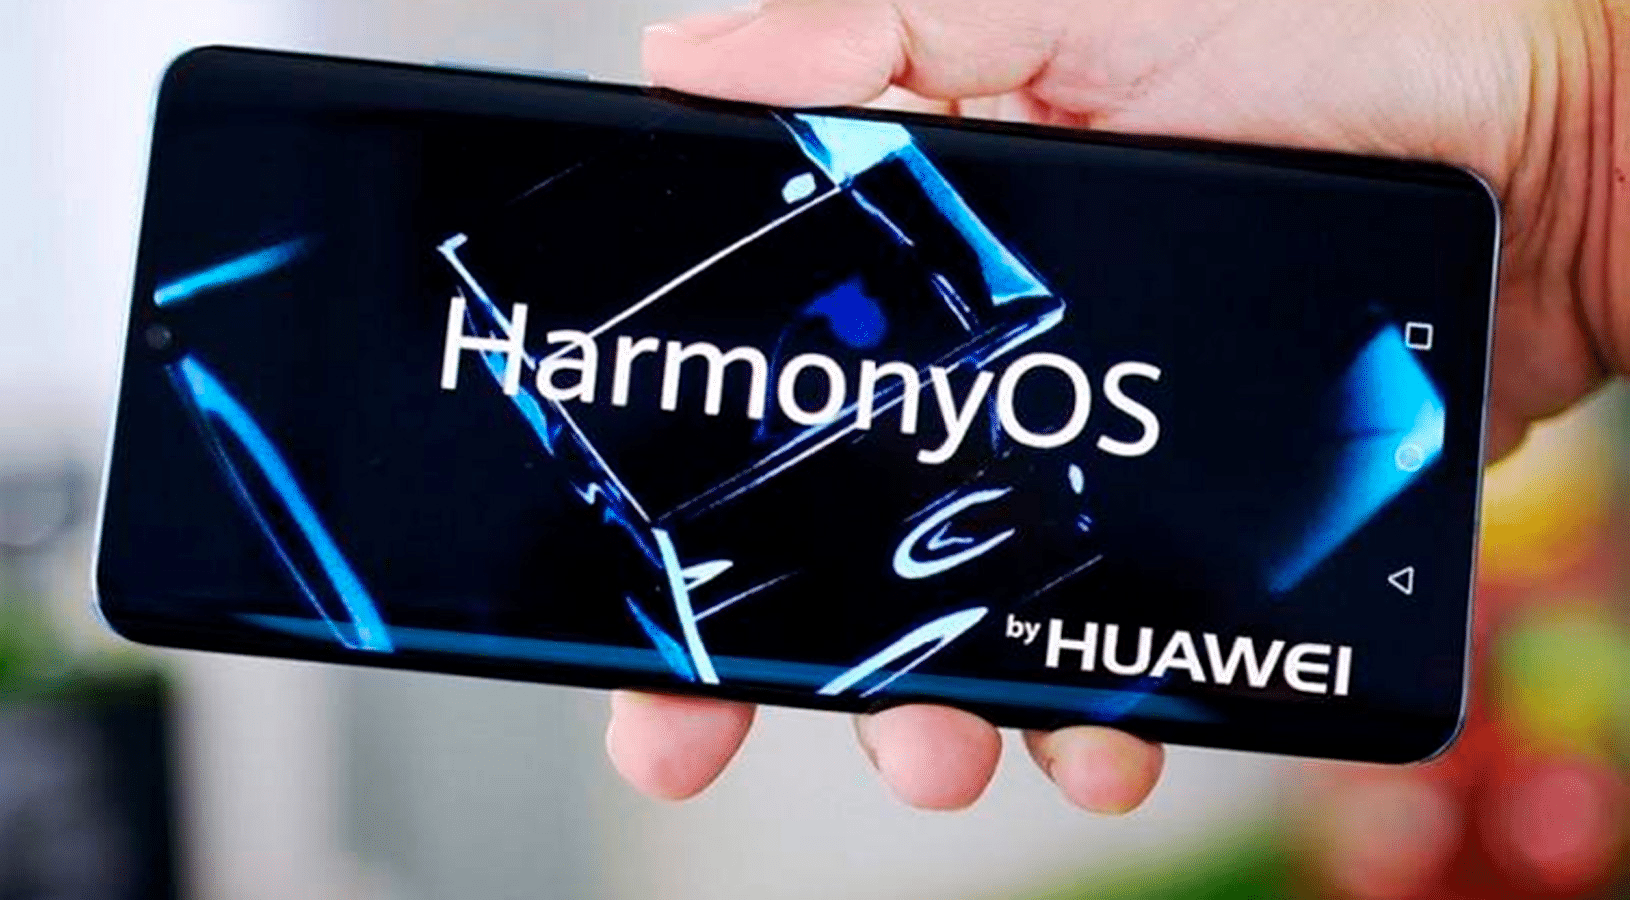 7 Huawei smartphones received the Harmony OS 2.0 operating system to replace Android